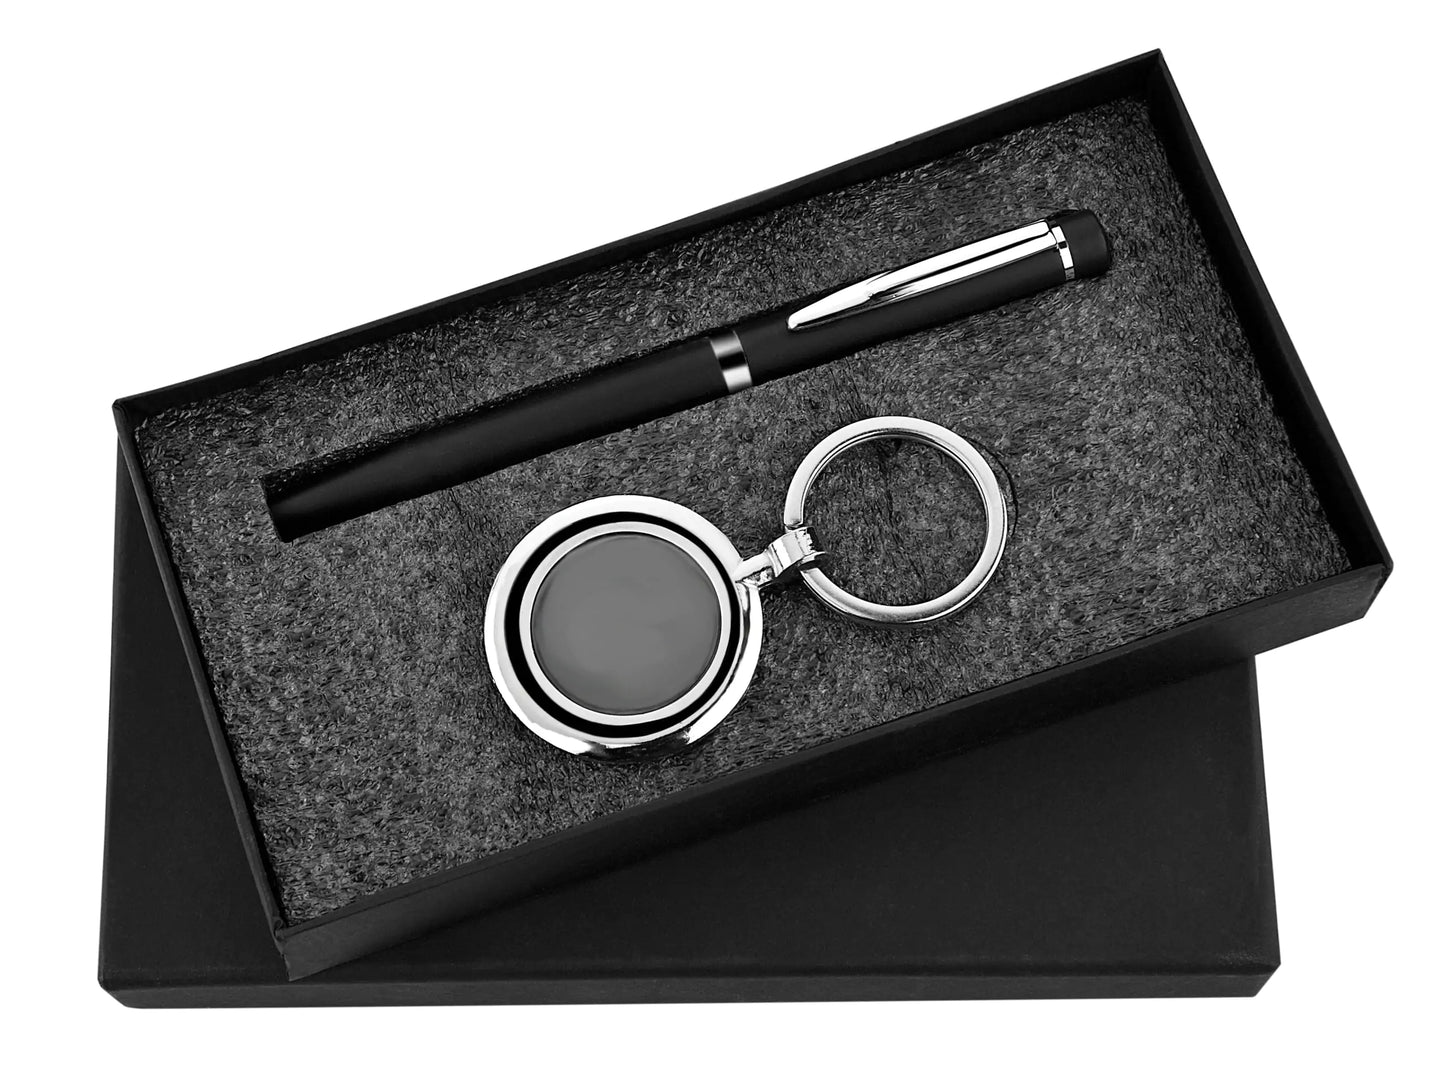 Pen and Keychain 2in1 Combo Gift Set - For Employee Joining Kit, Corporate, Client or Dealer Gifting, Promotional Freebie JKSR106